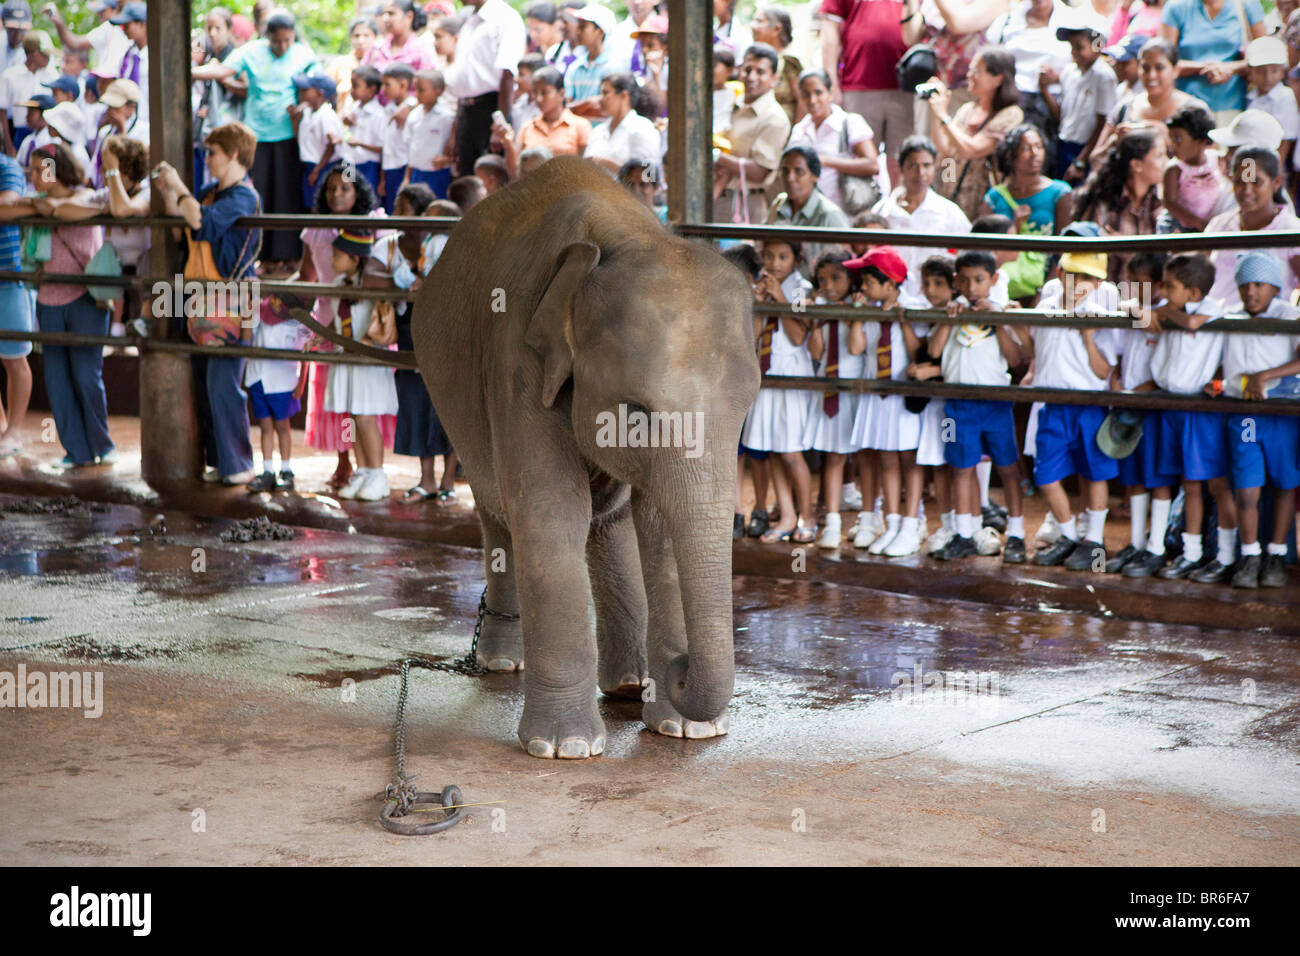 Locals and tourists watching elephants in The Pinnawela Elephant Orphanage Stock Photo